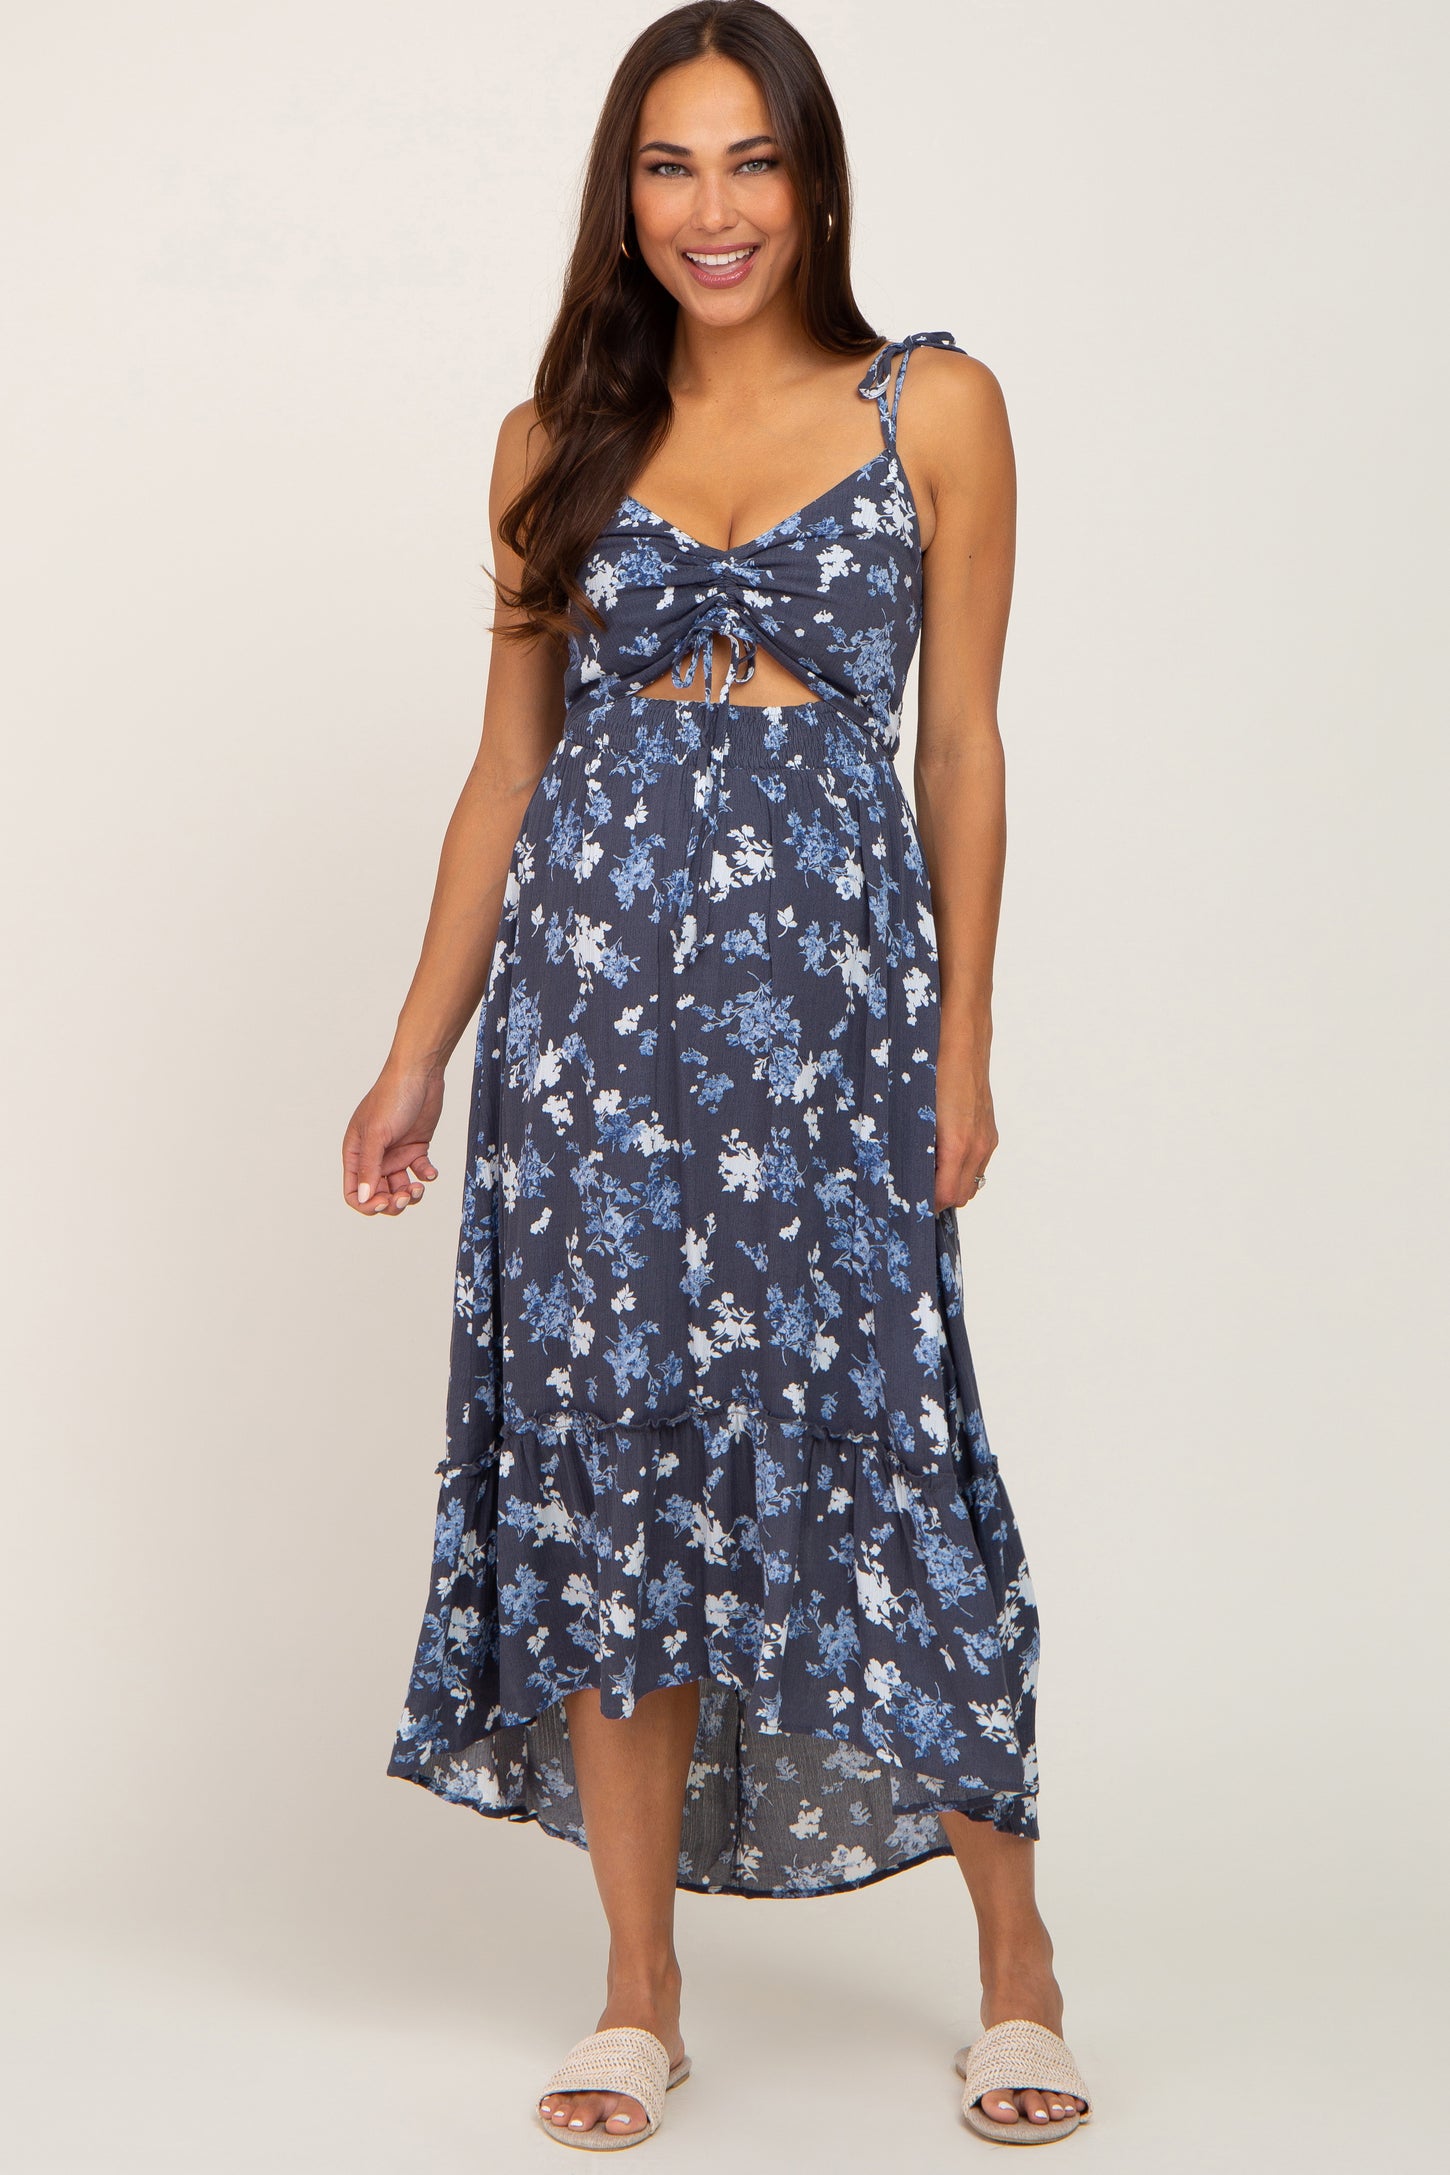 PinkBlush Navy Floral Fitted Maternity Dress